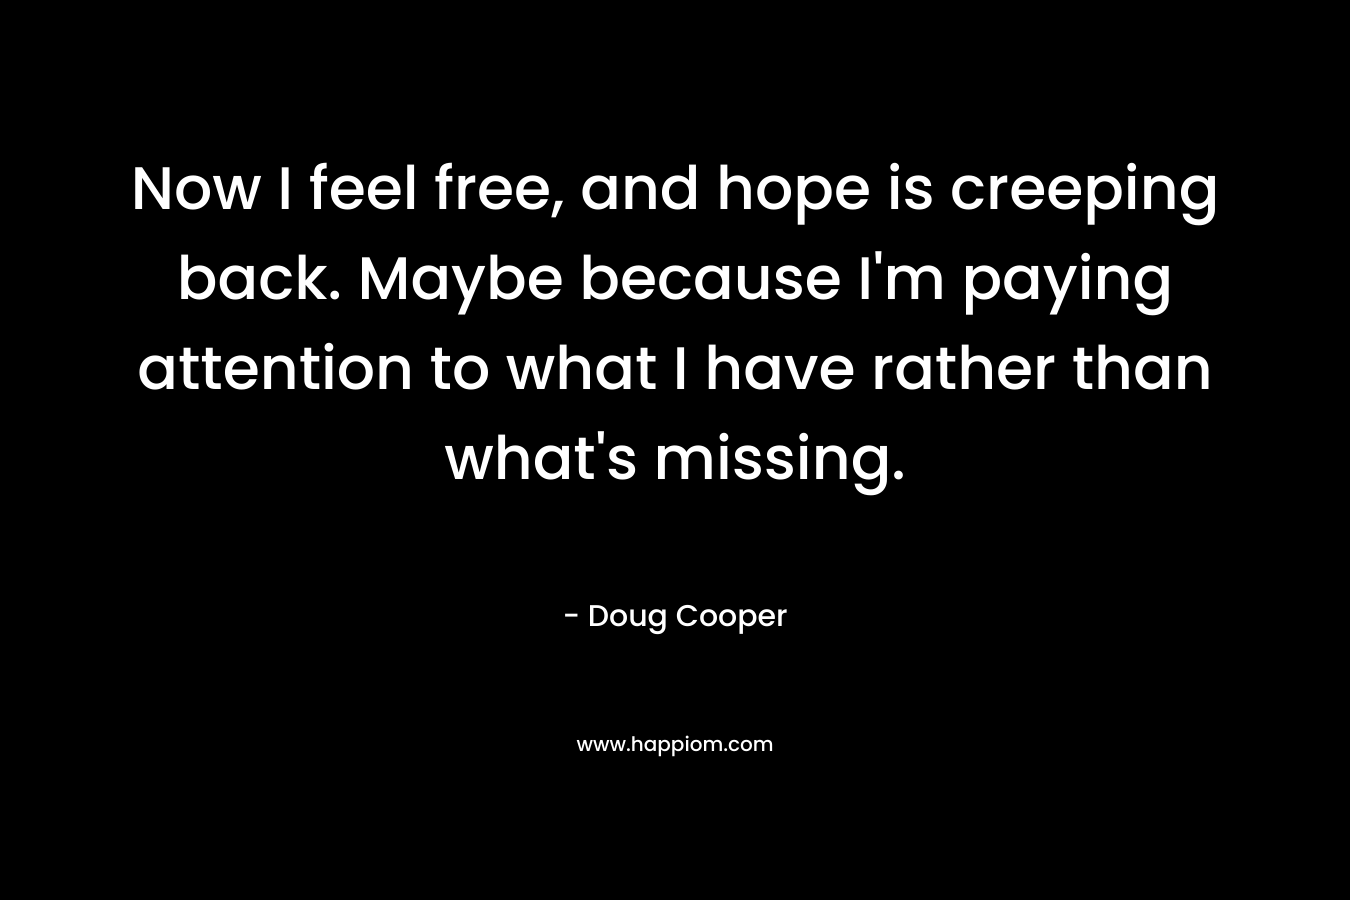 Now I feel free, and hope is creeping back. Maybe because I'm paying attention to what I have rather than what's missing.